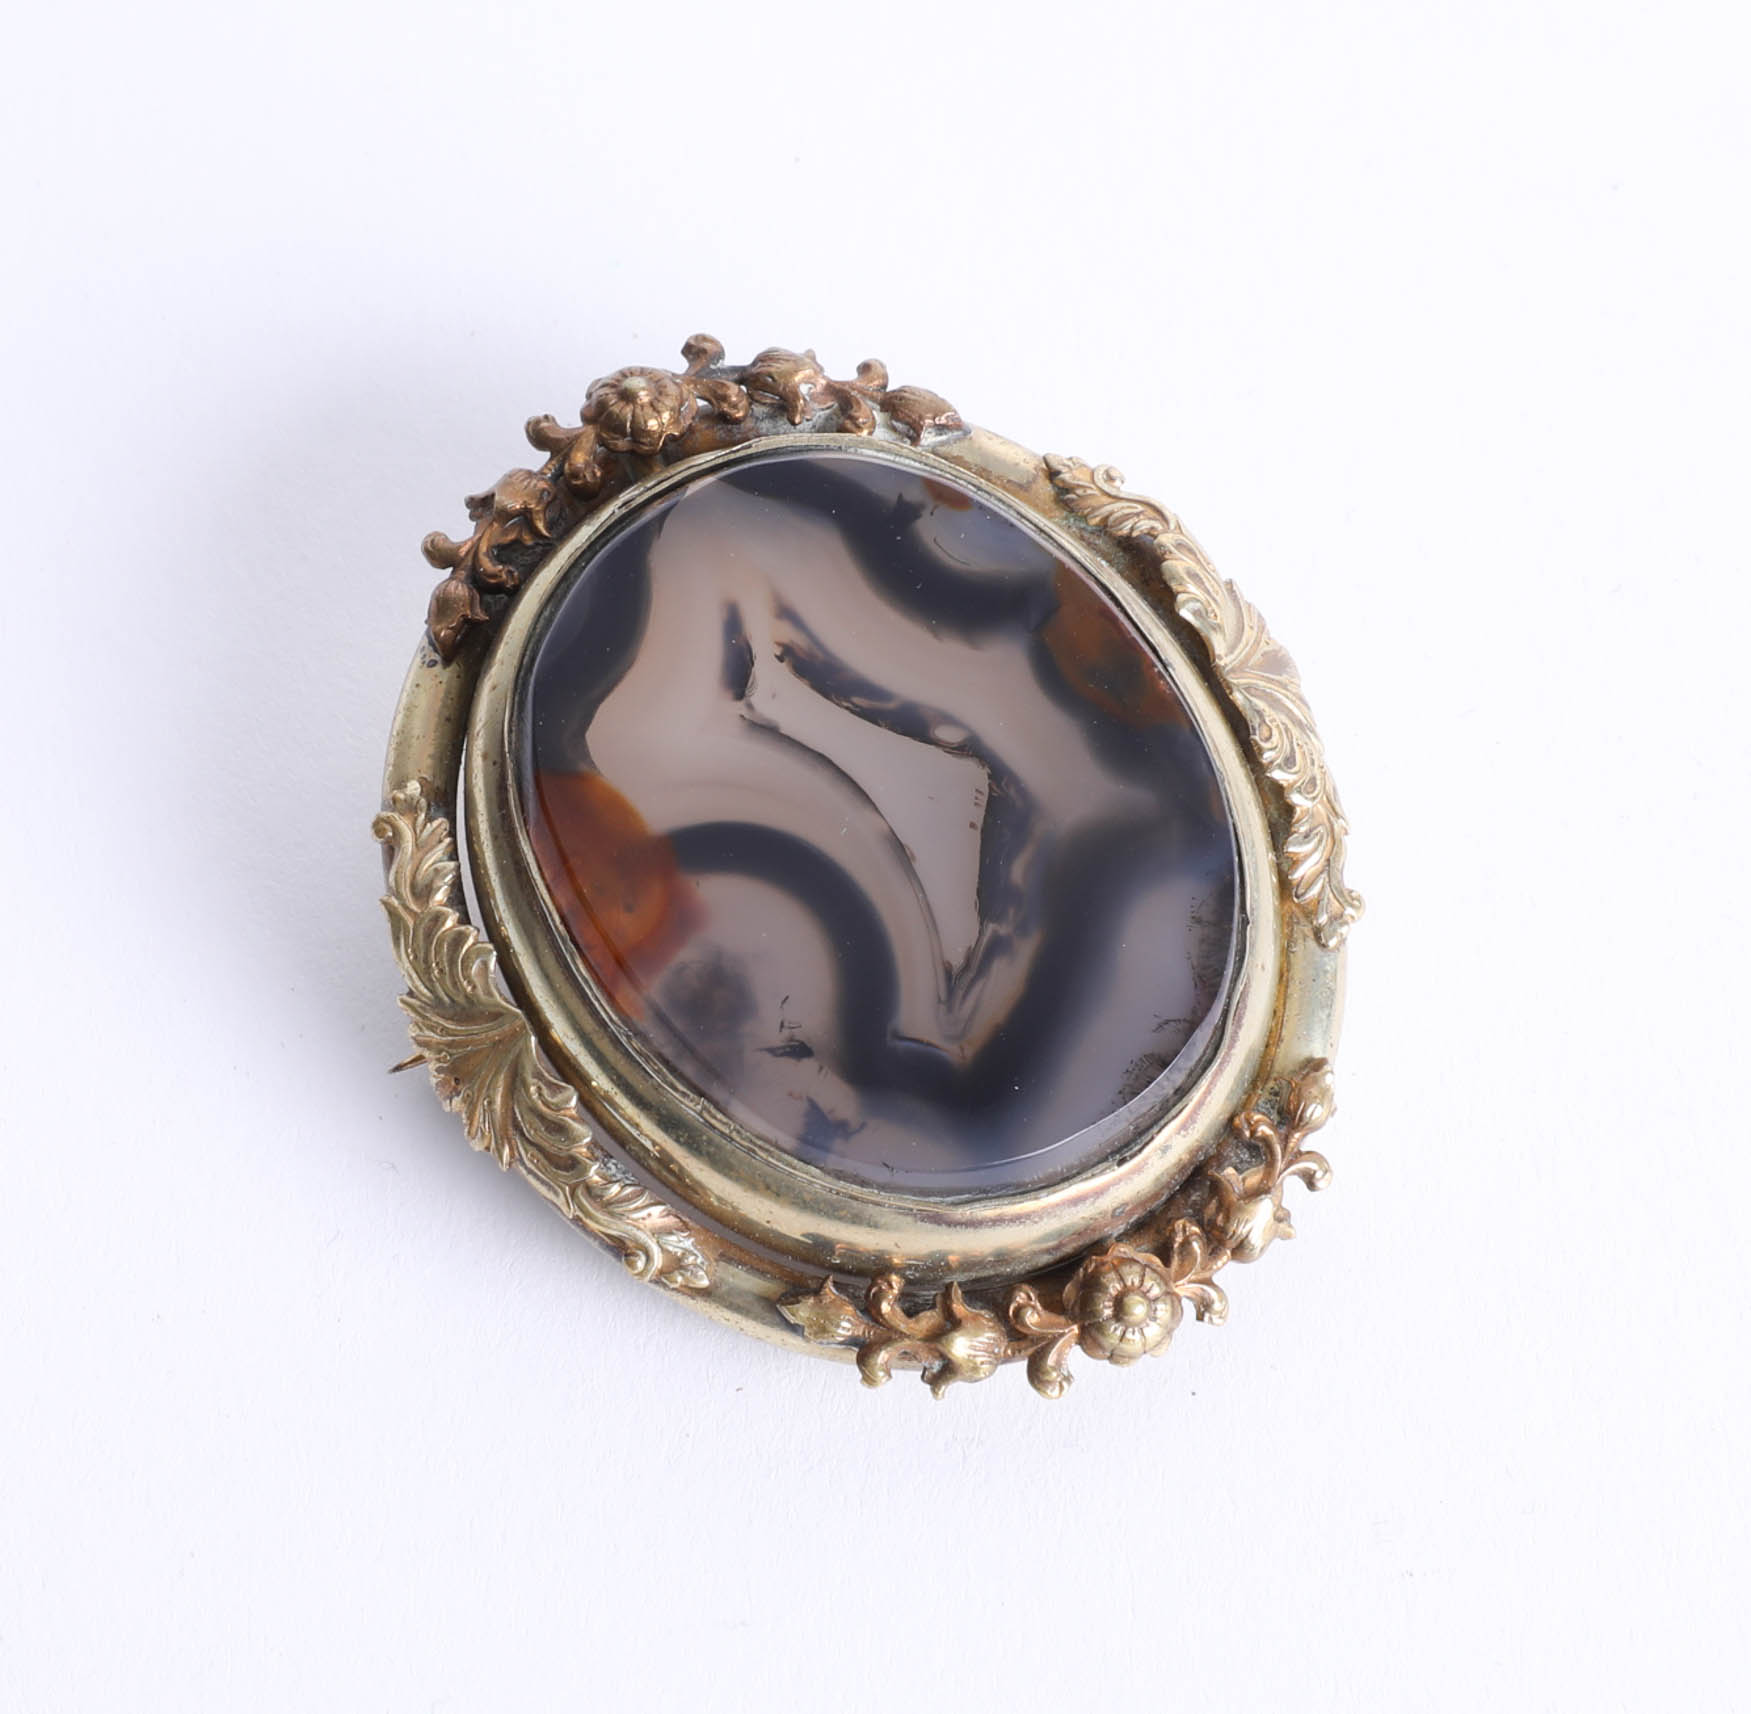 Victorian pinchbeck large brooch 60mm x 50mm.